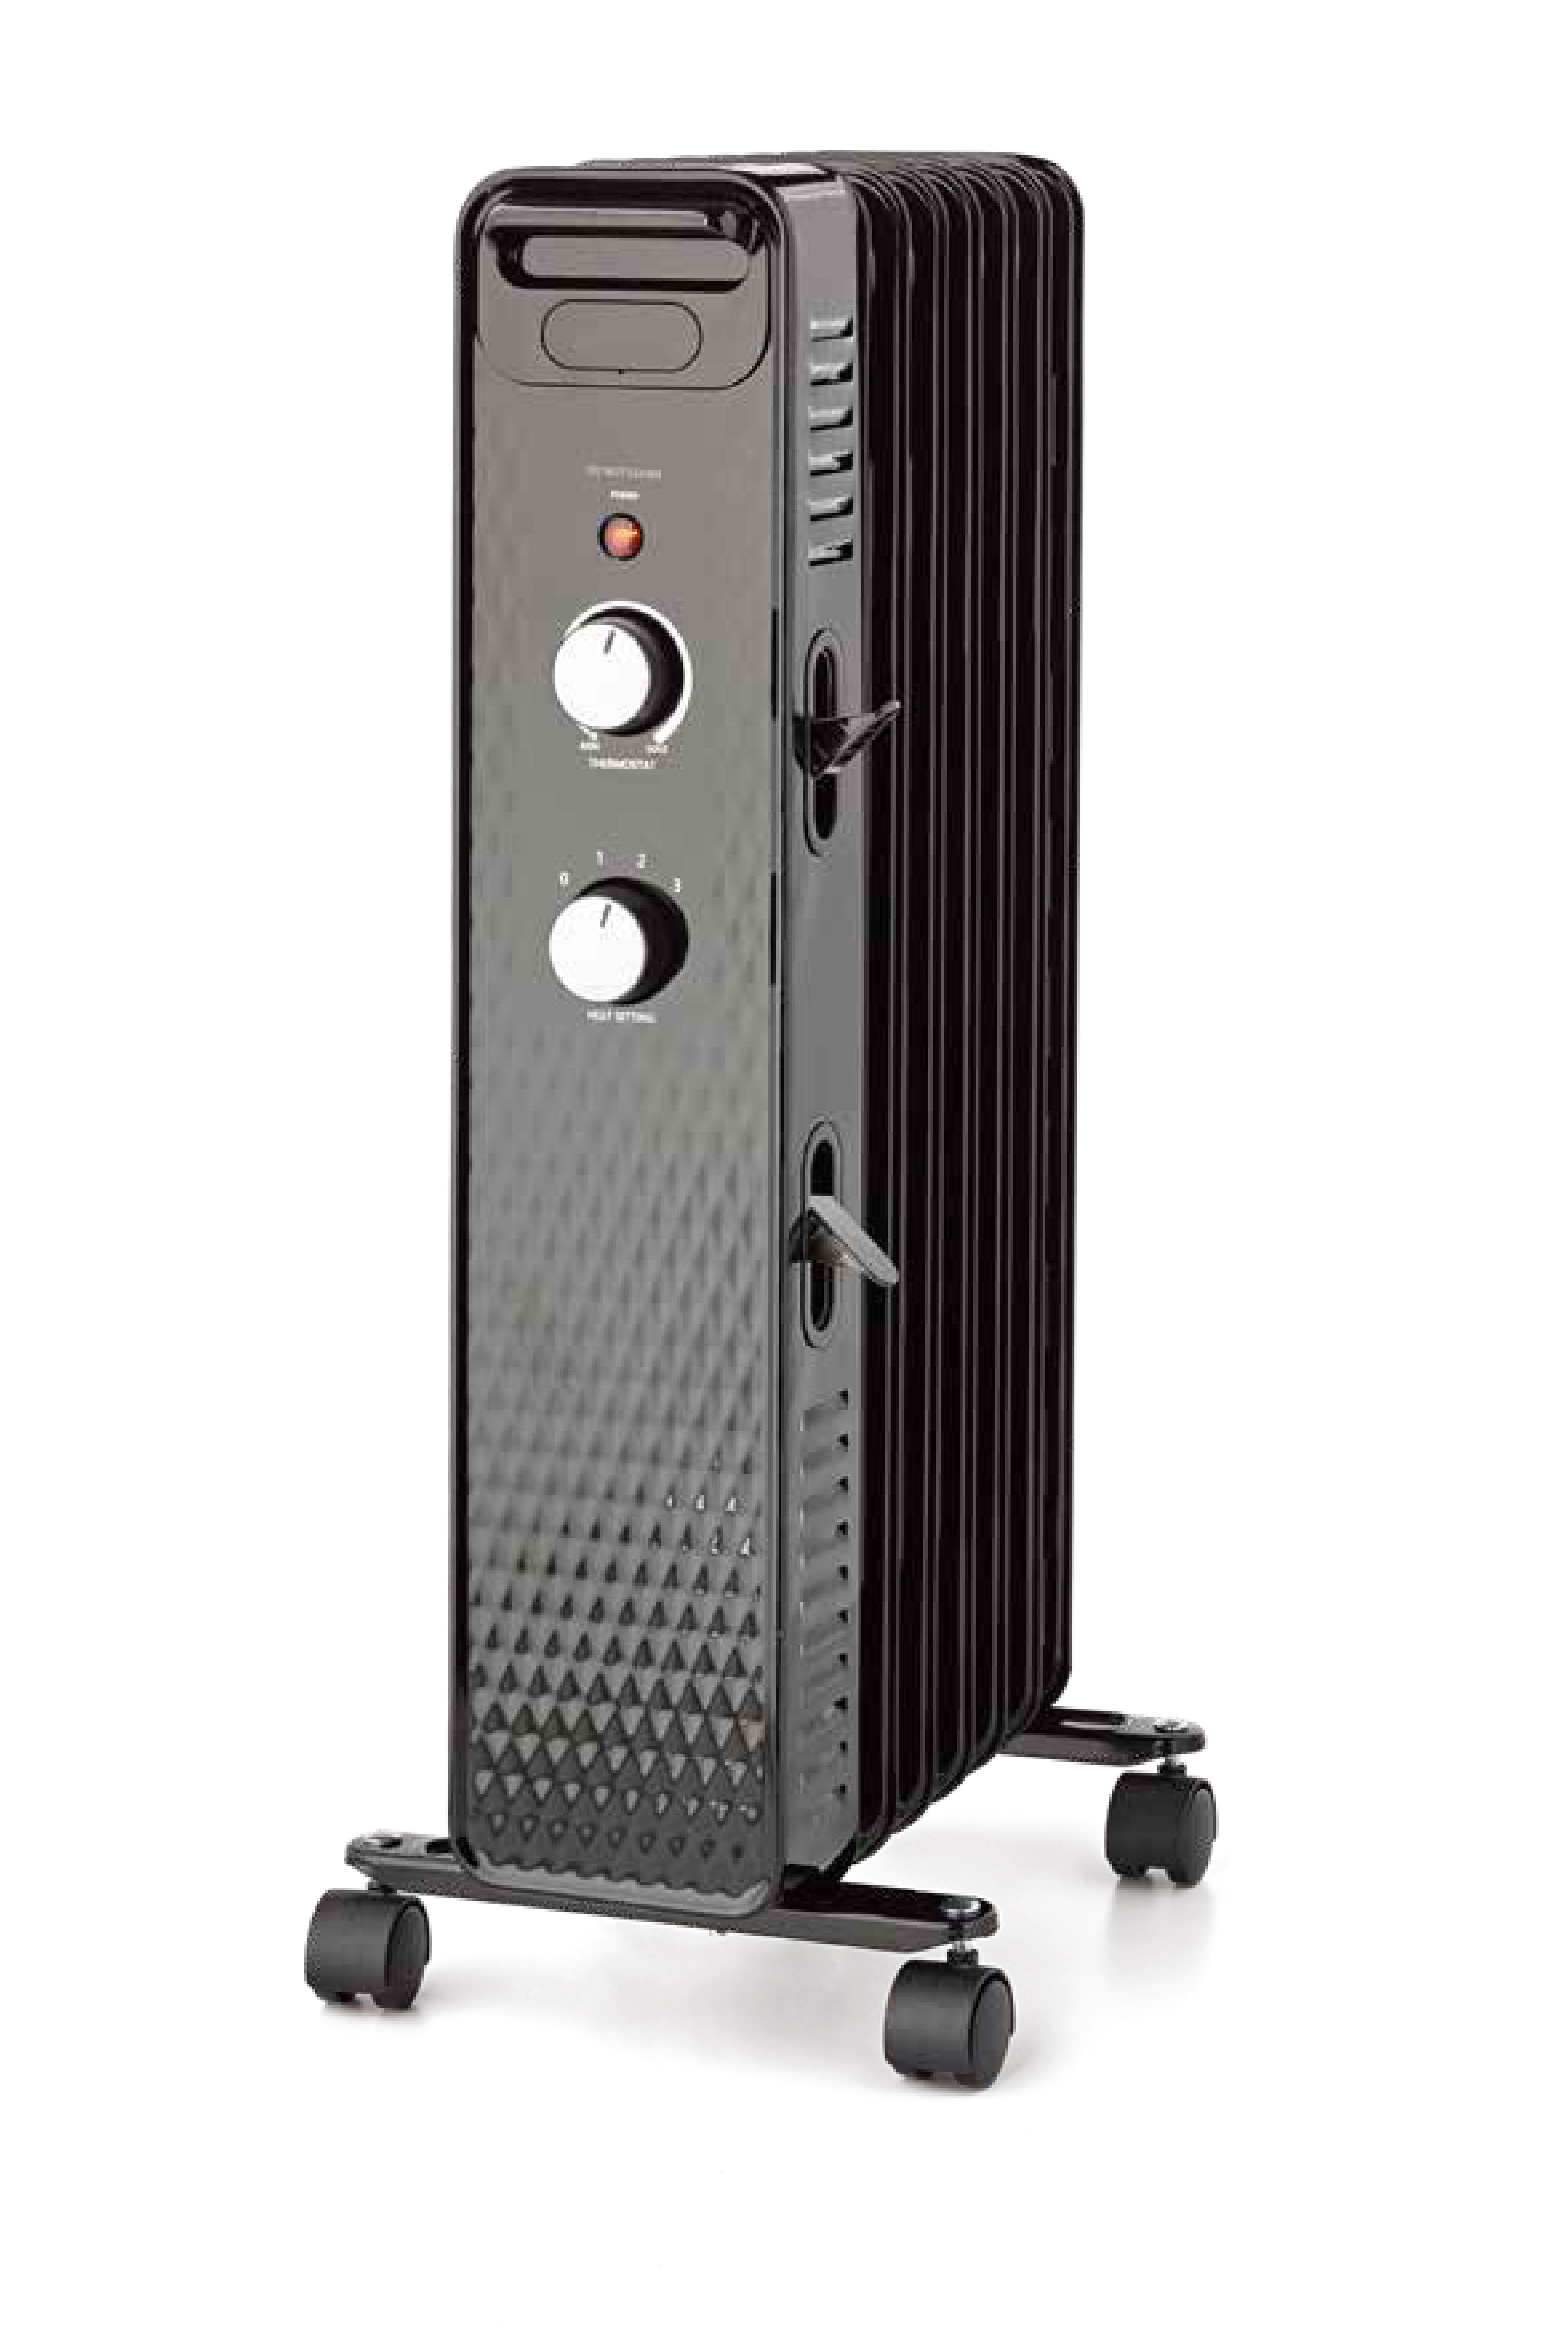 Radiator Heater 1500W Oil Heater with Remote Electric Spa 250 Sq Ft Coverage 